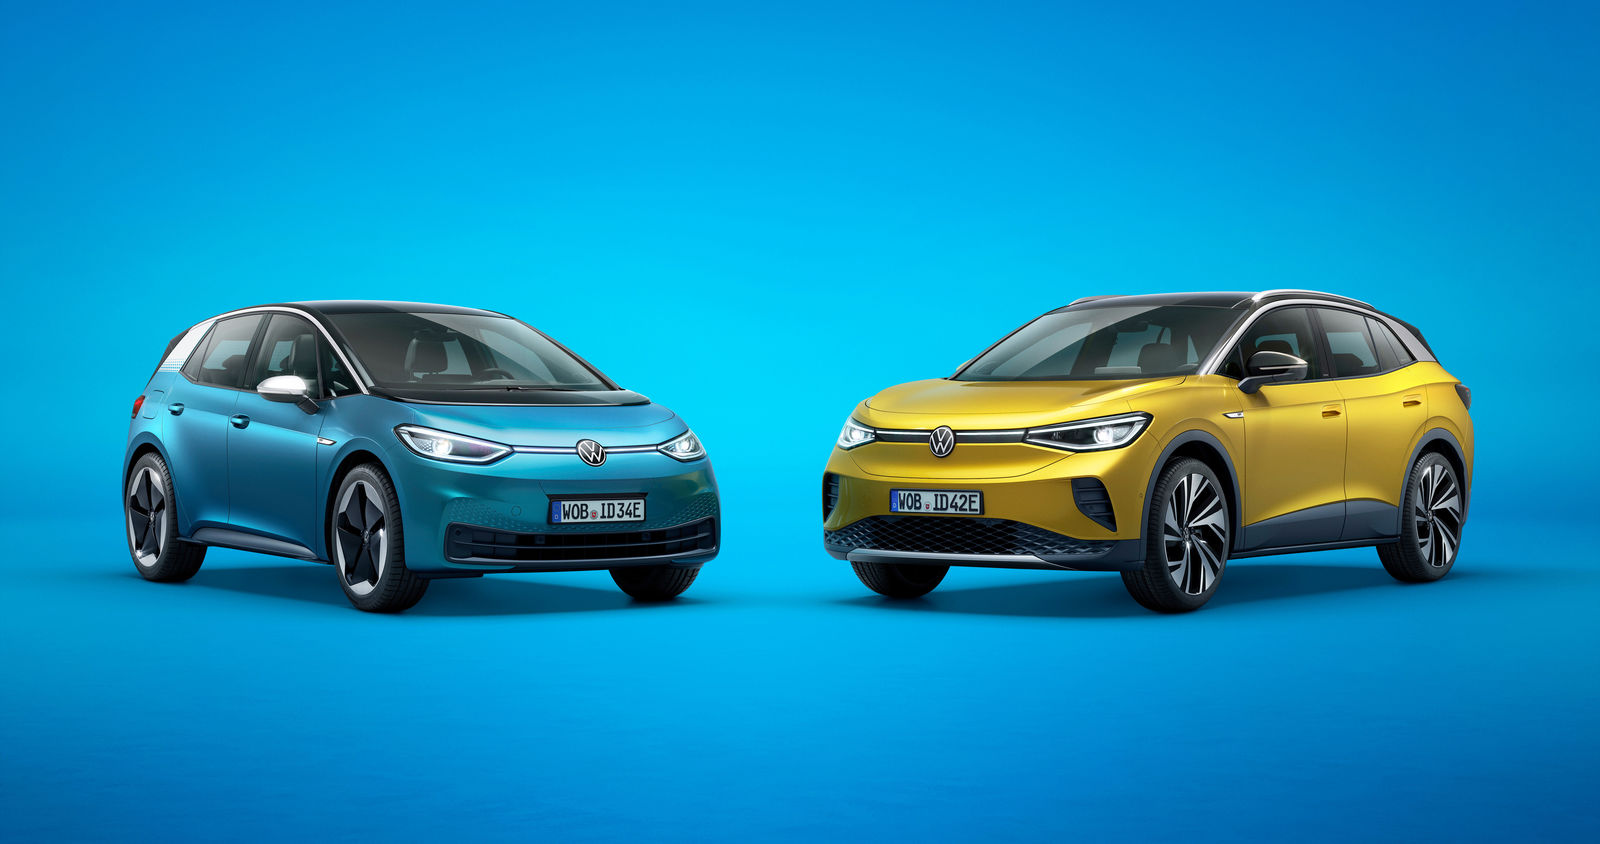 The new Volkswagen ID.3 and ID.4